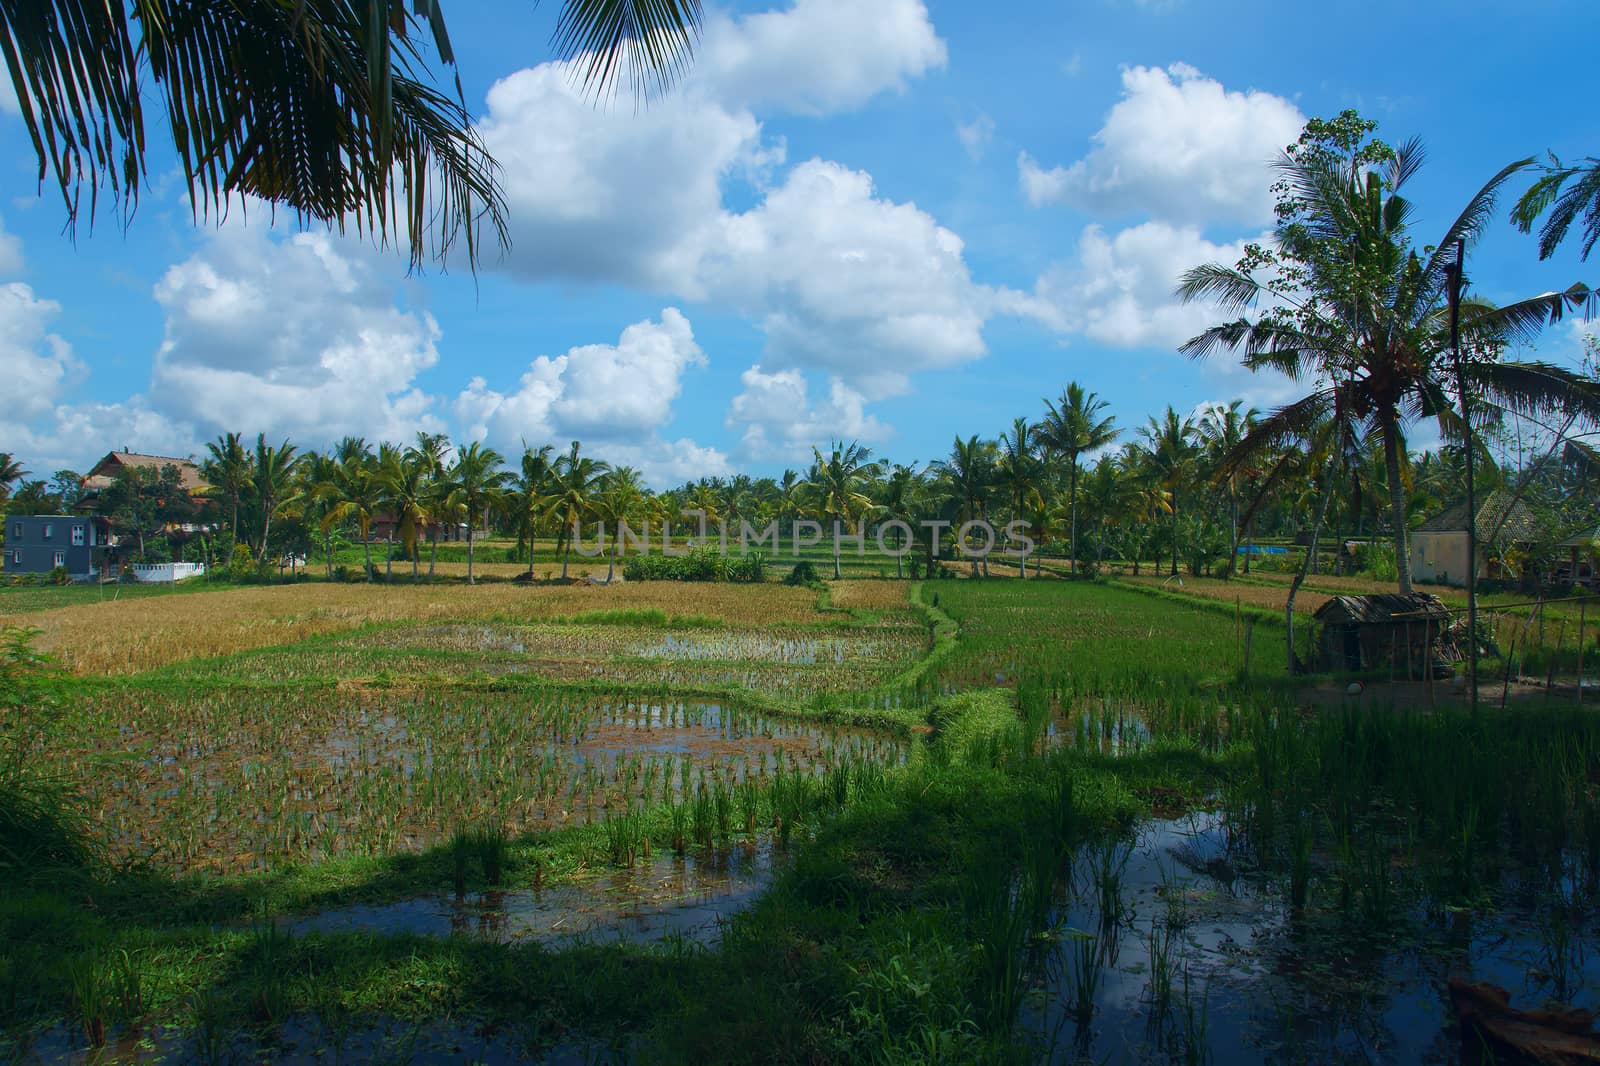 Rice field near the town of Ubud in Bali